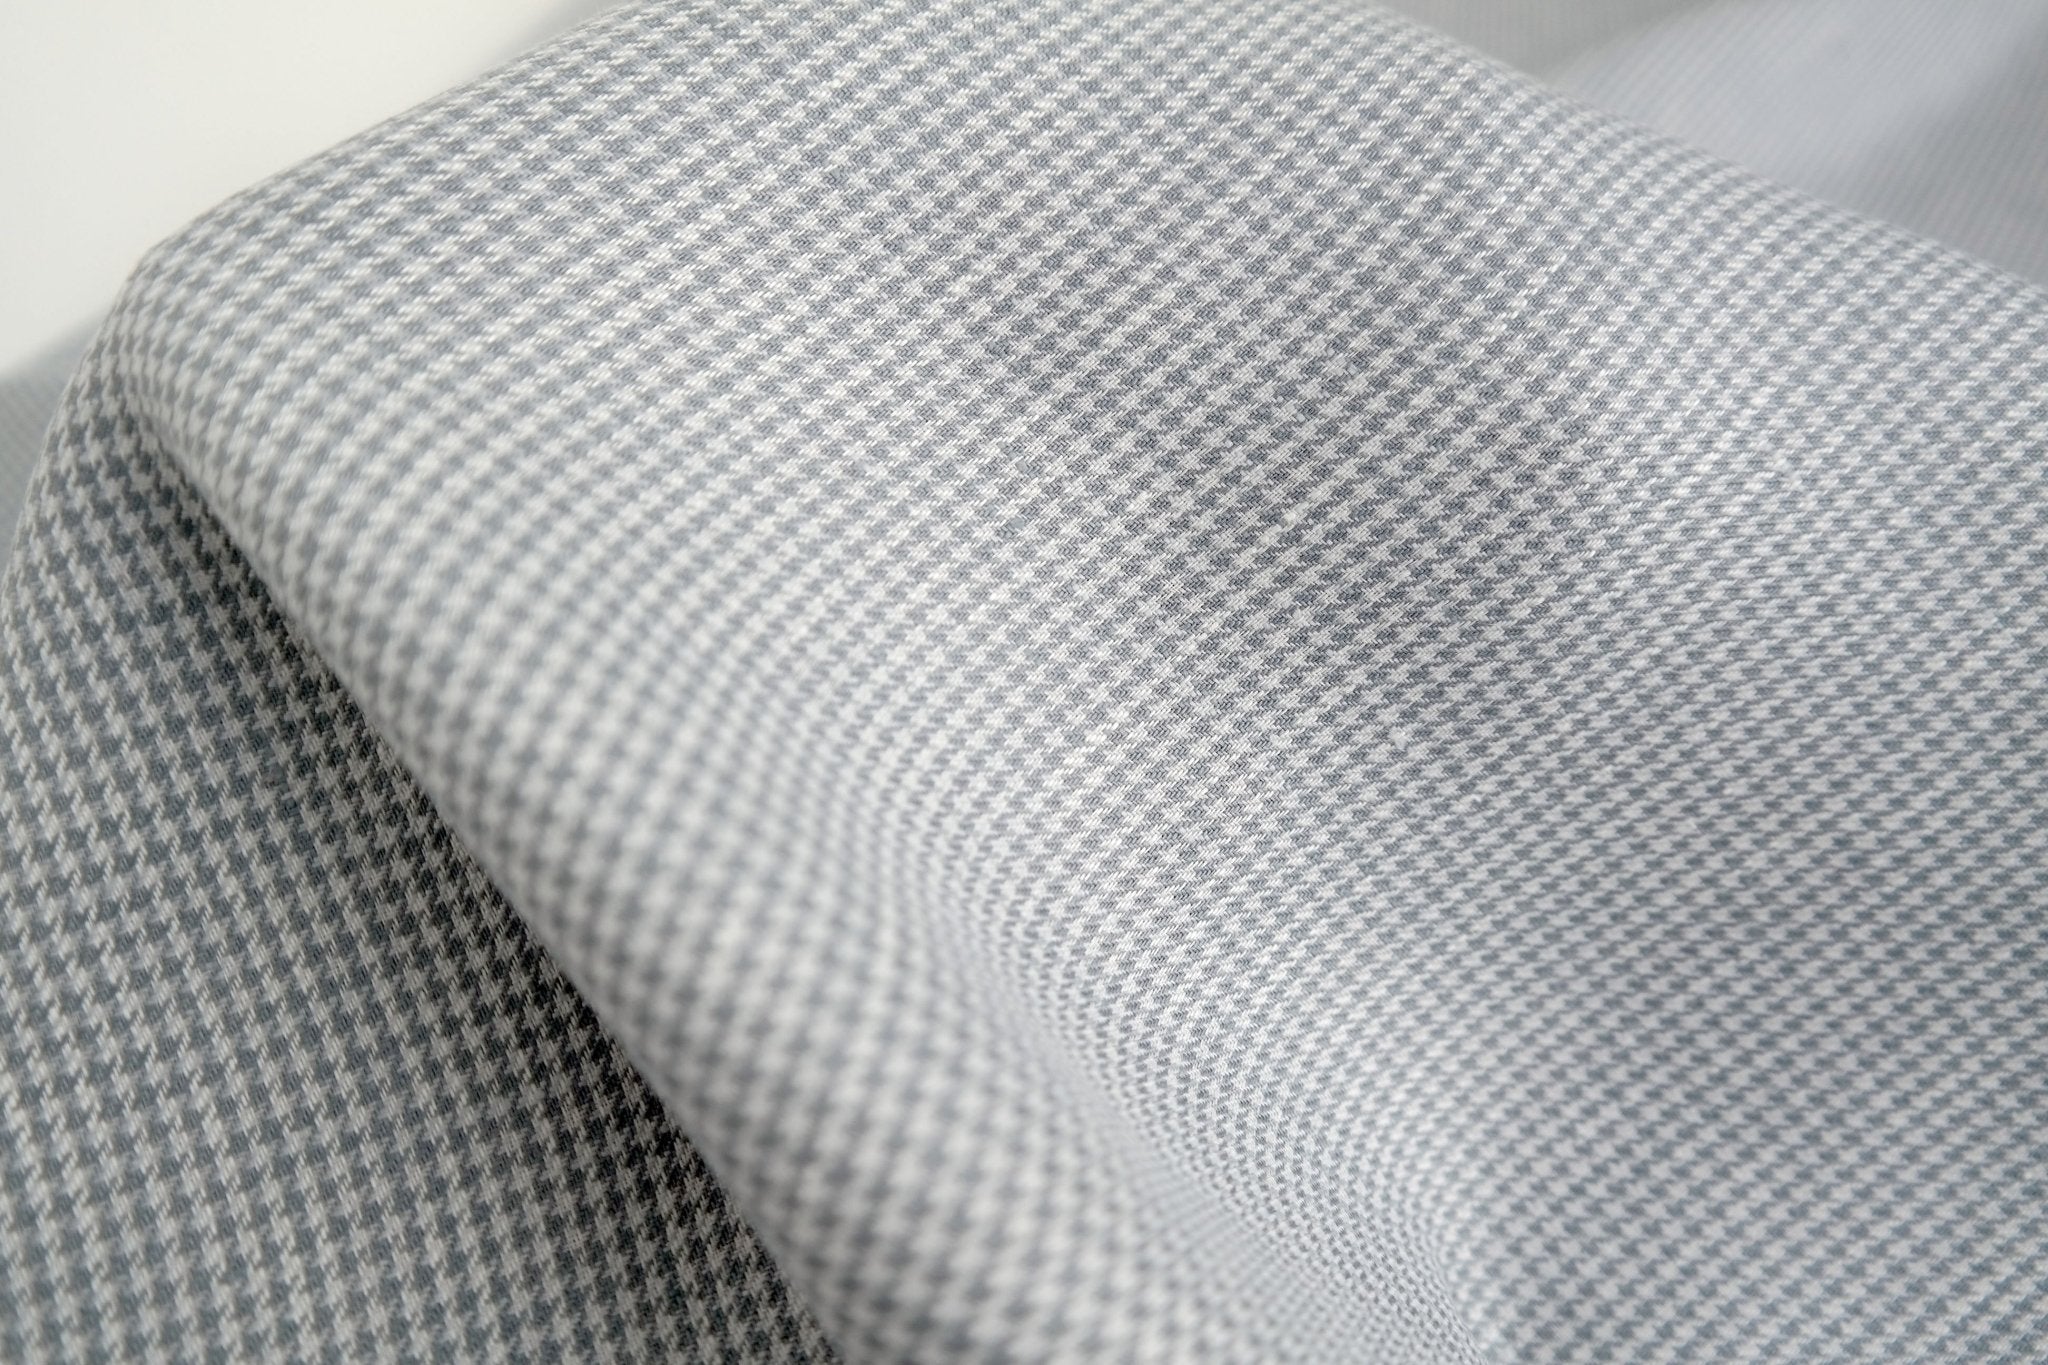 100% Linen Fabric Hound Tooth Check Grey Color 3958 - The Linen Lab - Grey check 3958